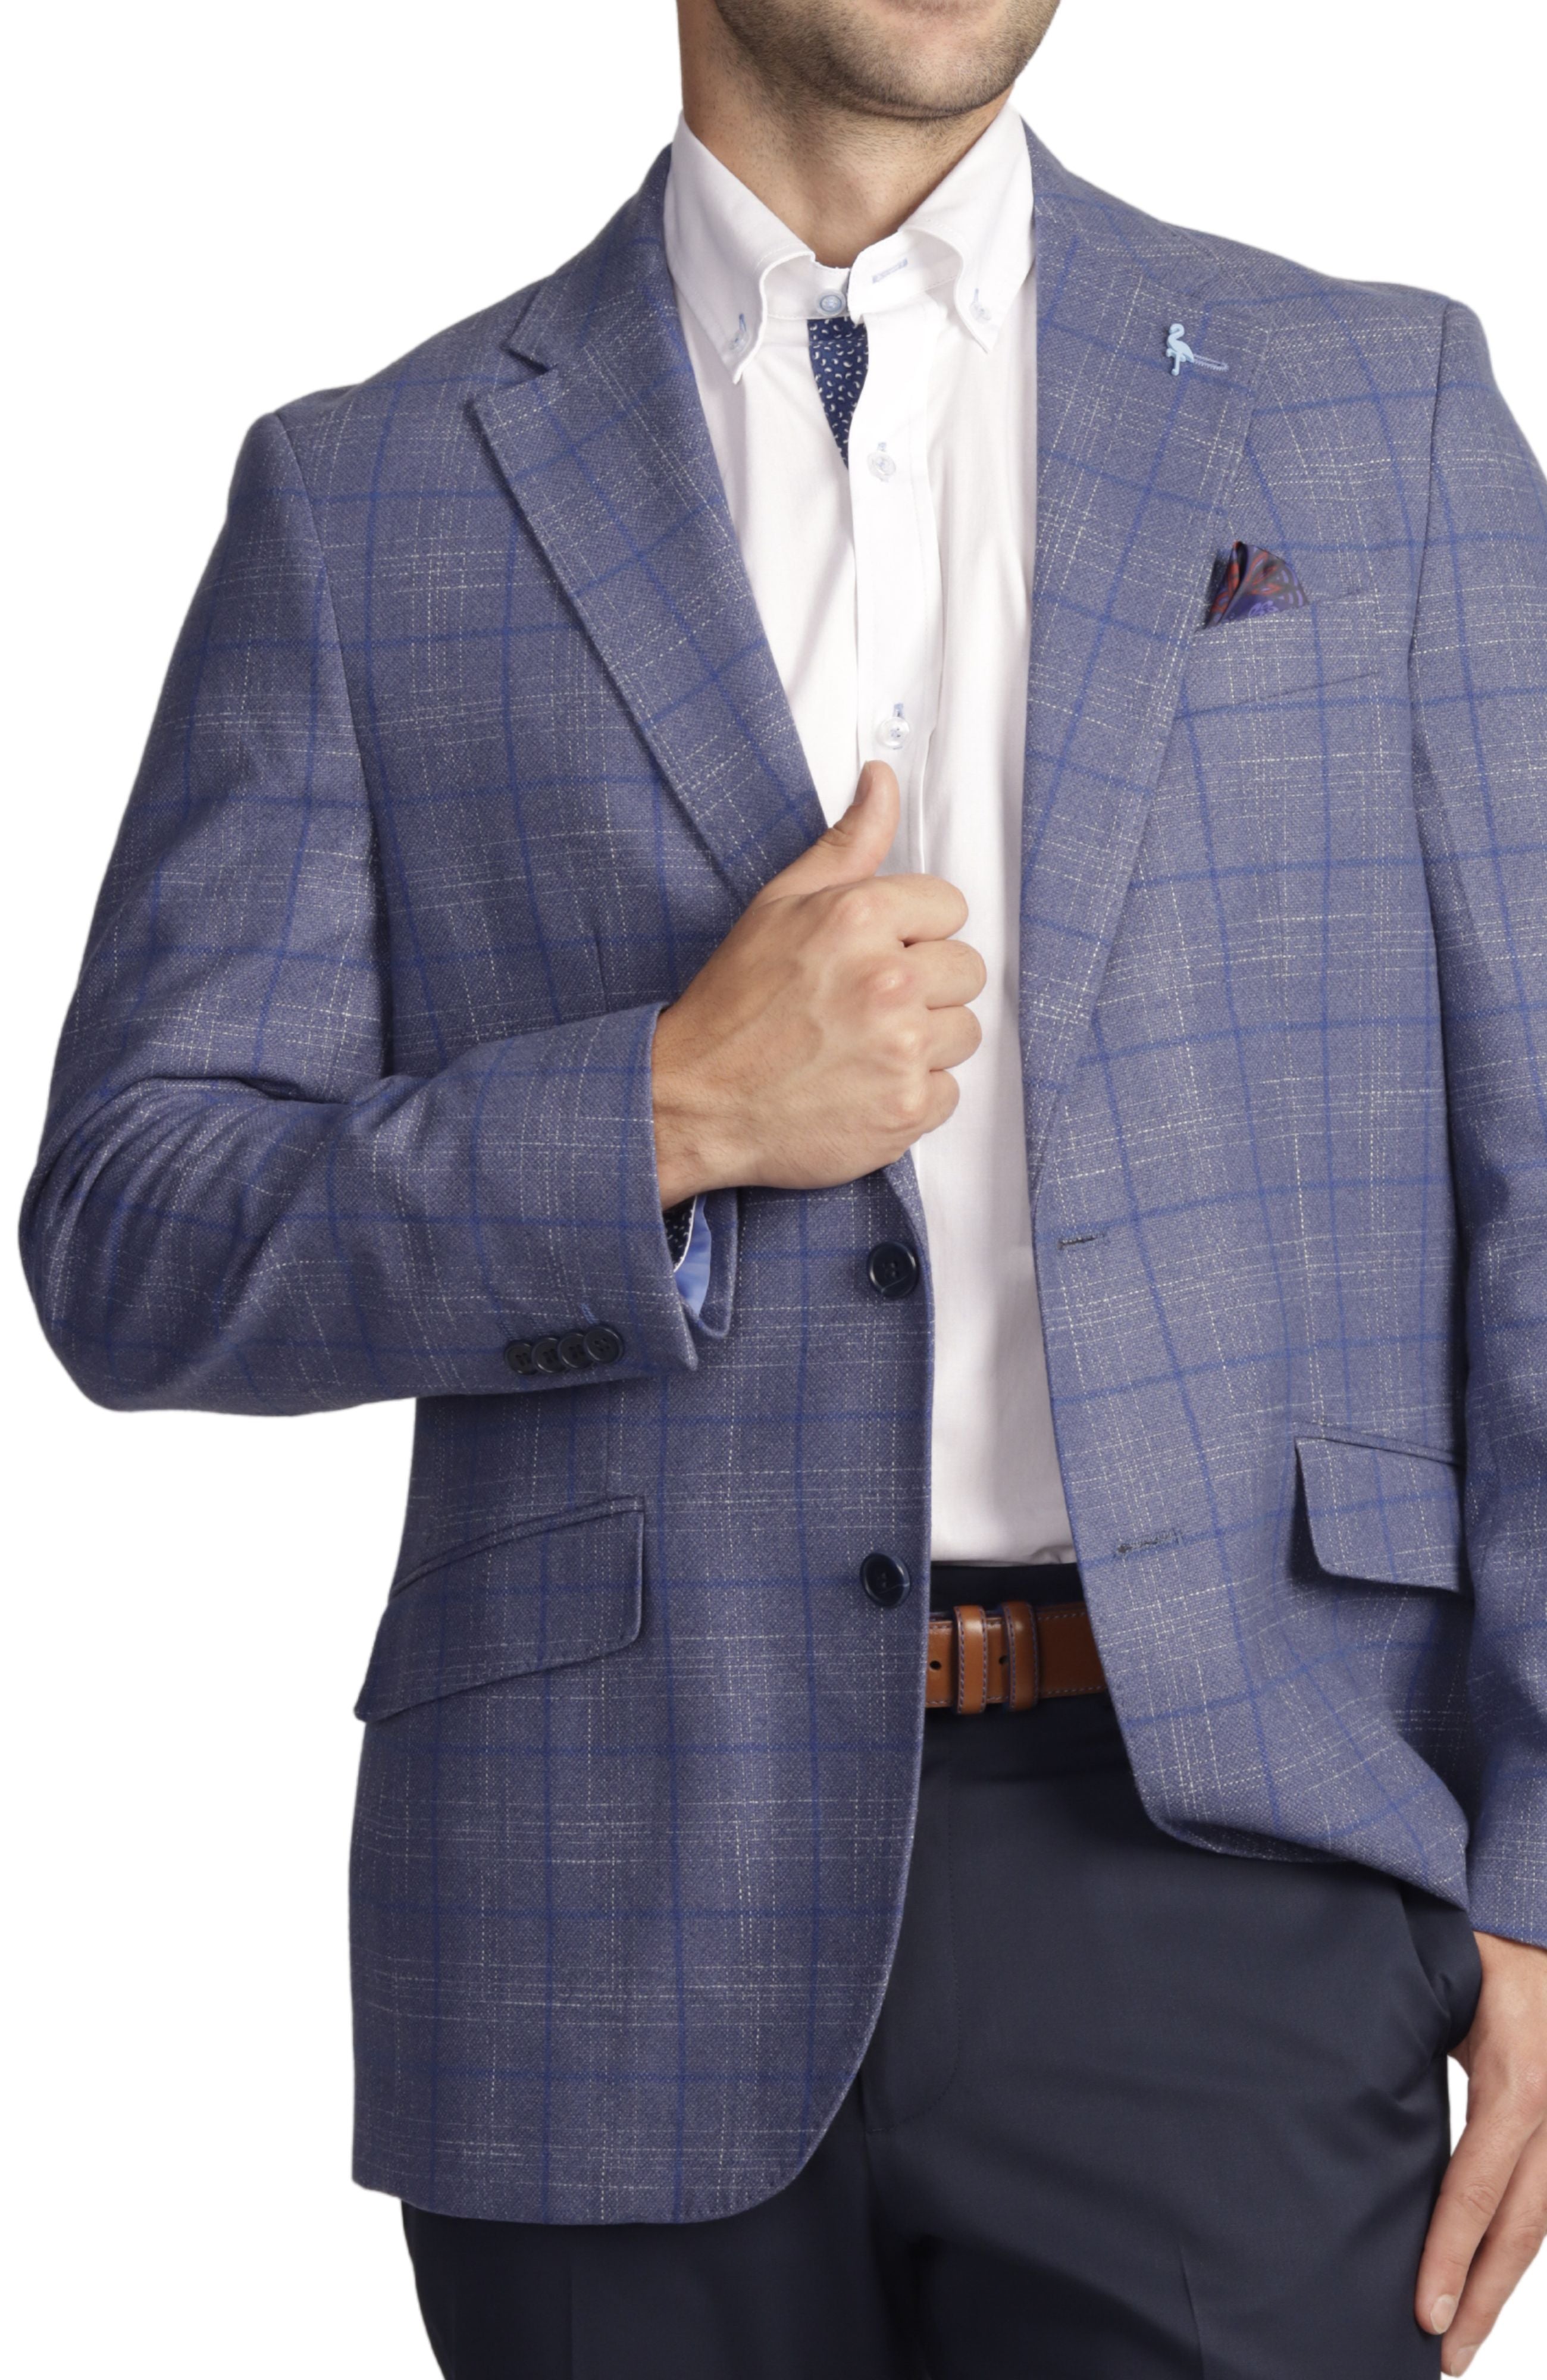 Full Price Sport Coats – TailorByrd